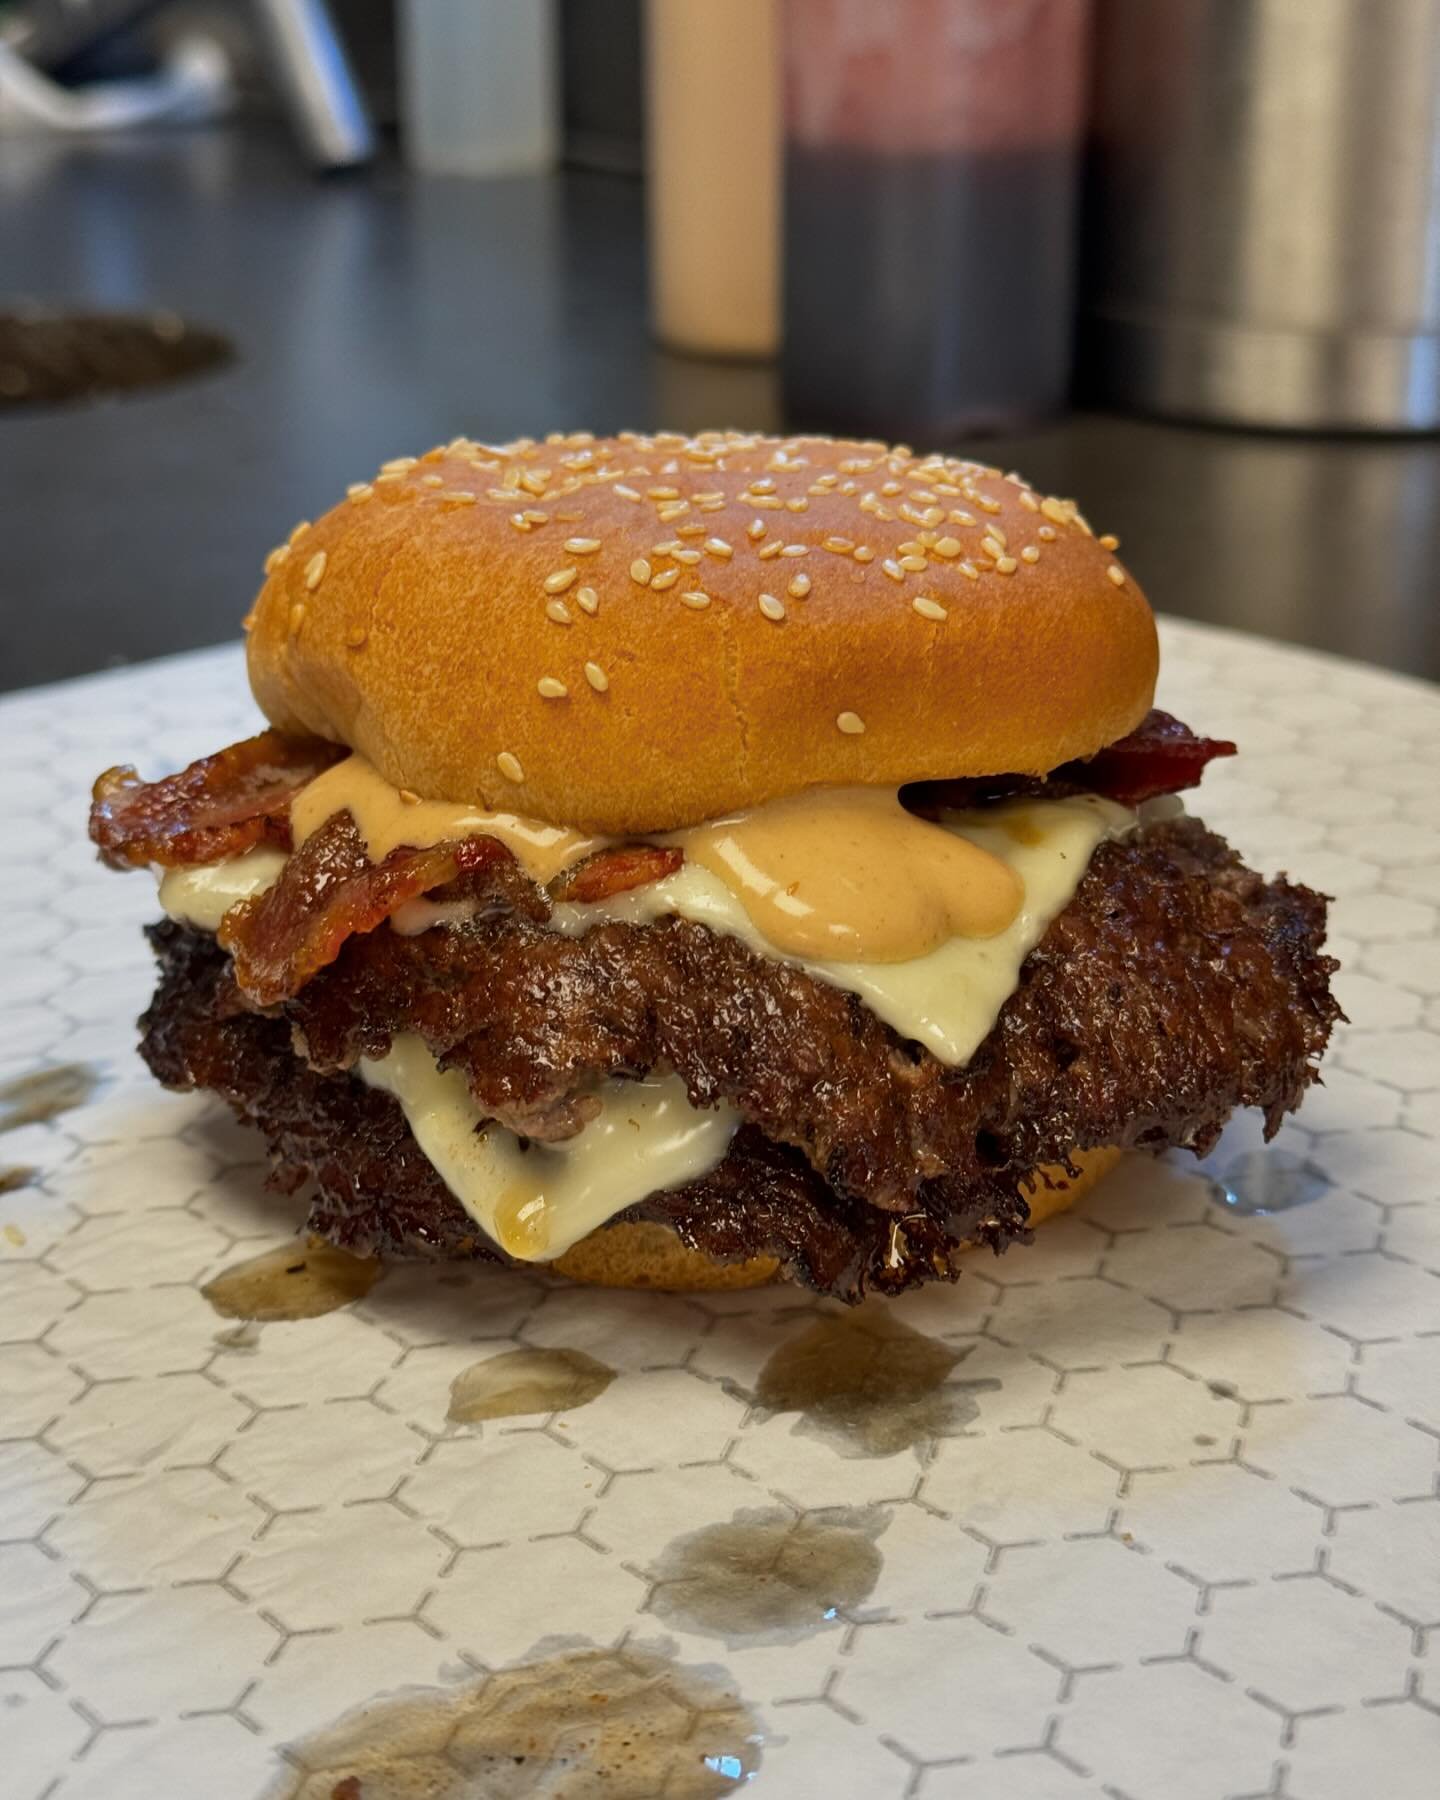 just a big ol&rsquo; burger waiting for you to come get it.

#friday #fridaythoughts #burger #burgerporn #burgerlover #burgertime #burgerlovers #burgerlife #burgerjoint #burgergram #burgers #burgershack #burgersandfries #burgersofinstagram #burgers🍔